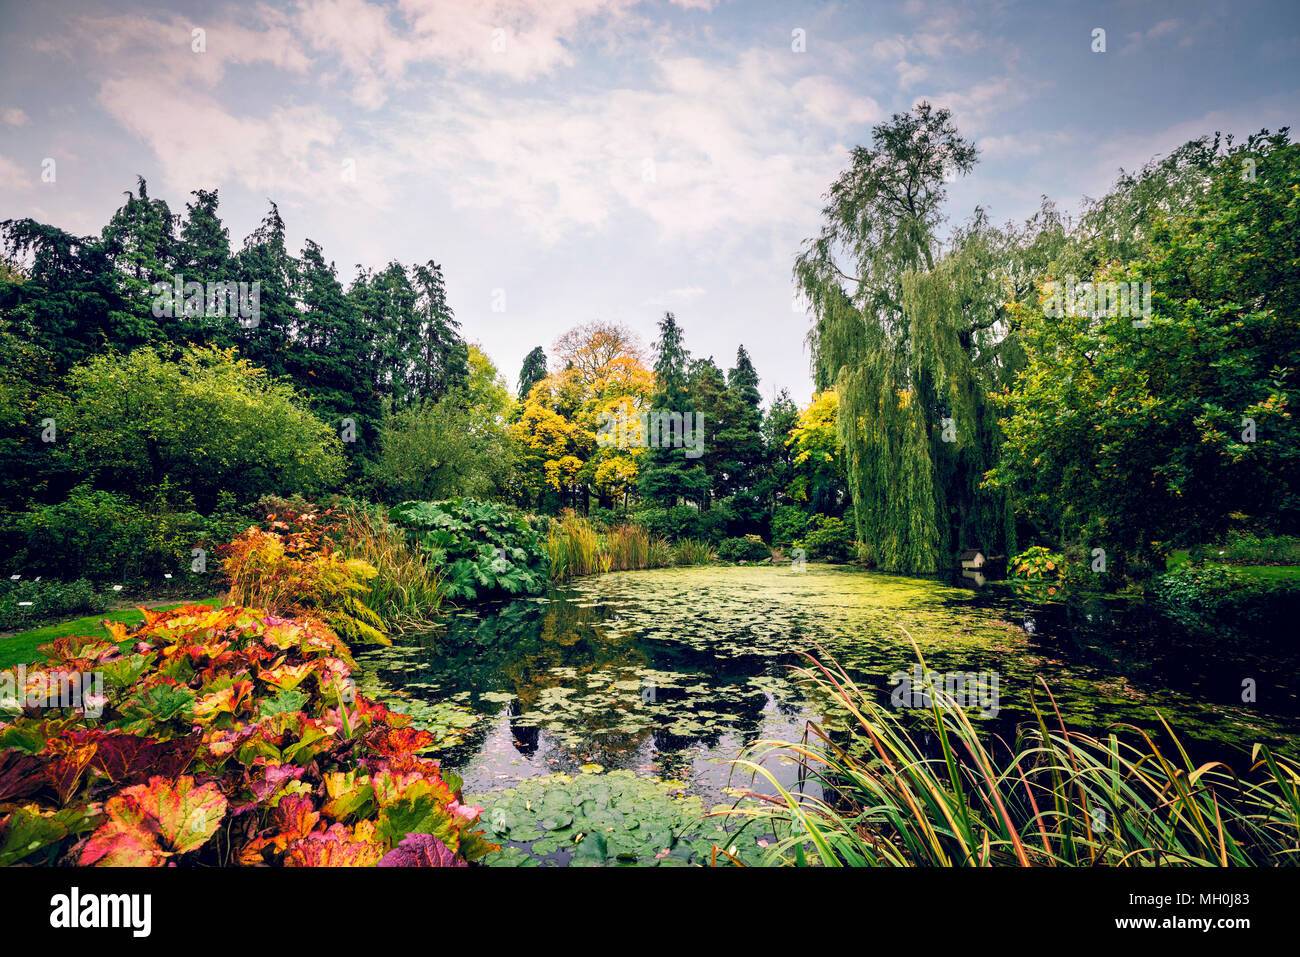 Garden pond with various plants in beautiful colors in the fall Stock Photo